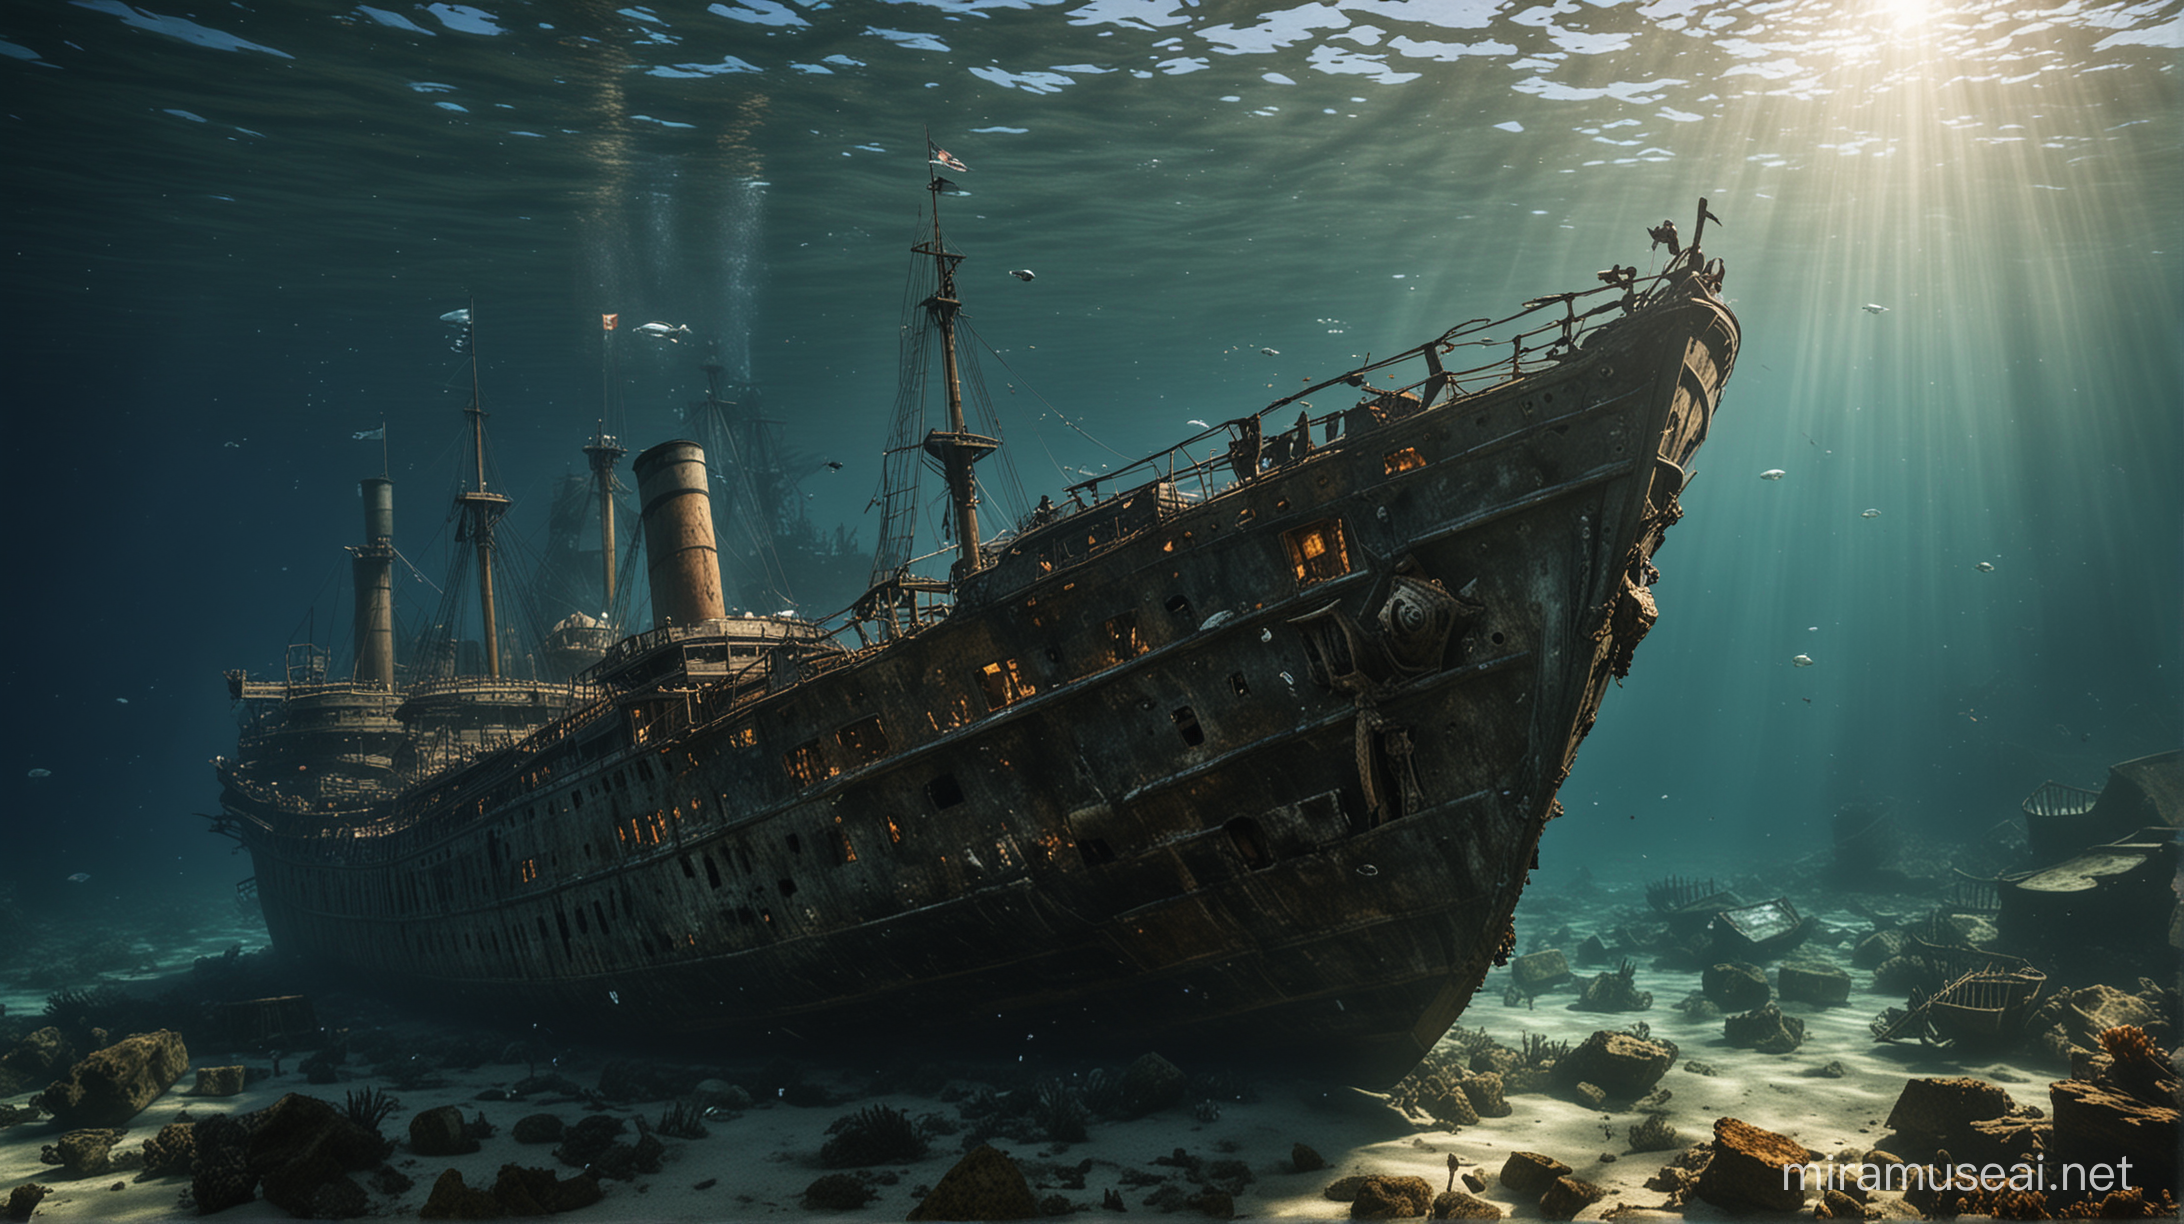 Exploring Historical Shipwrecks with Modern Technology